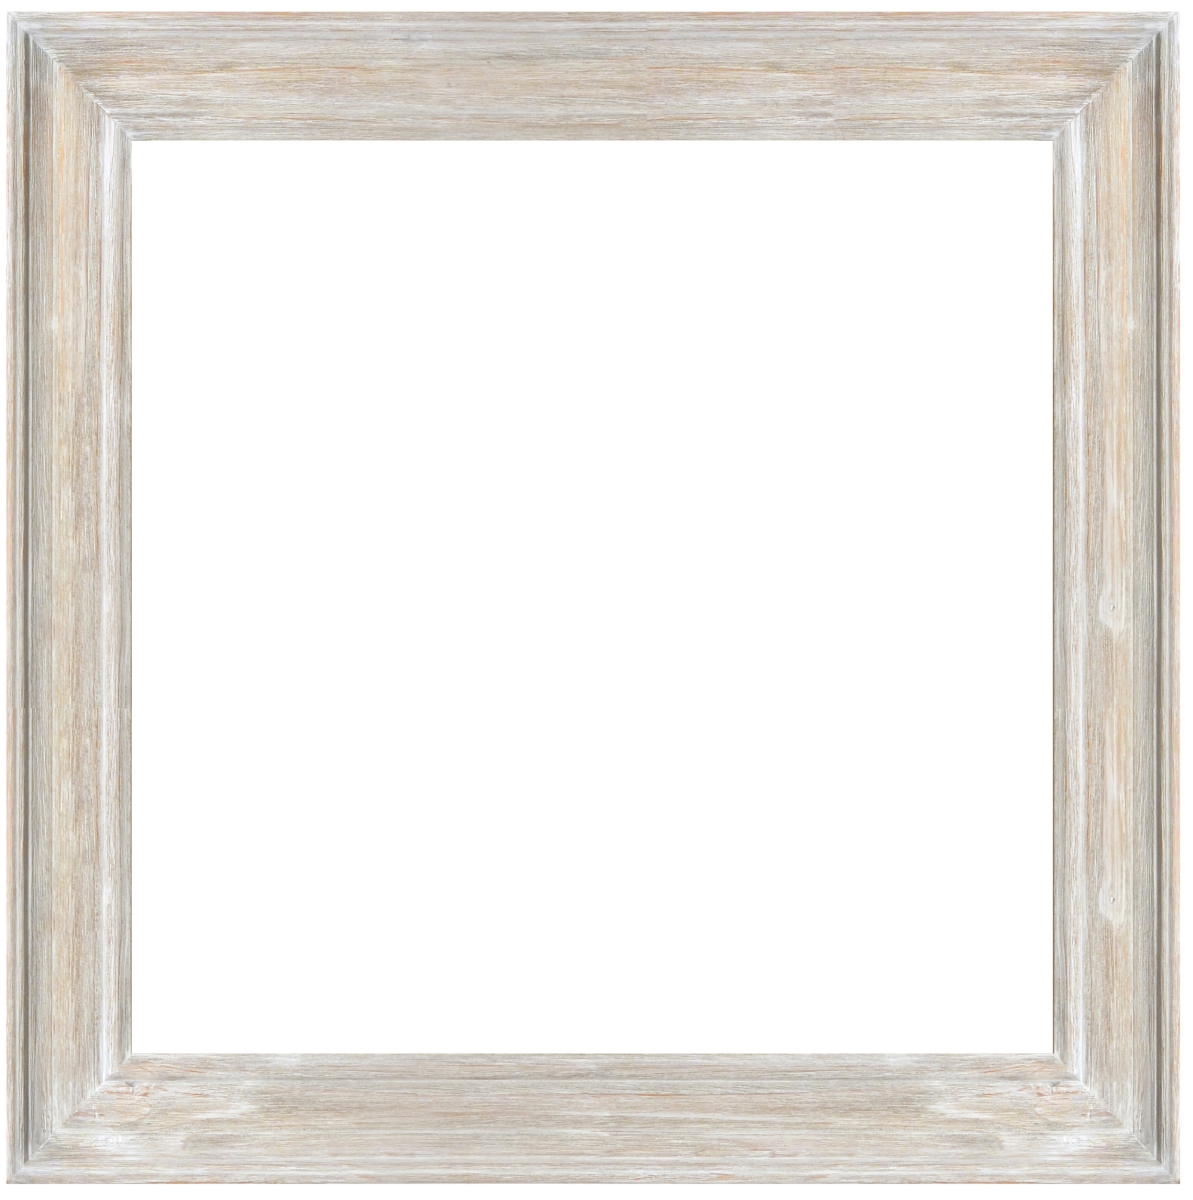 12008367 30 X 30 In. Misty Woods Frame - Distressed White Wash